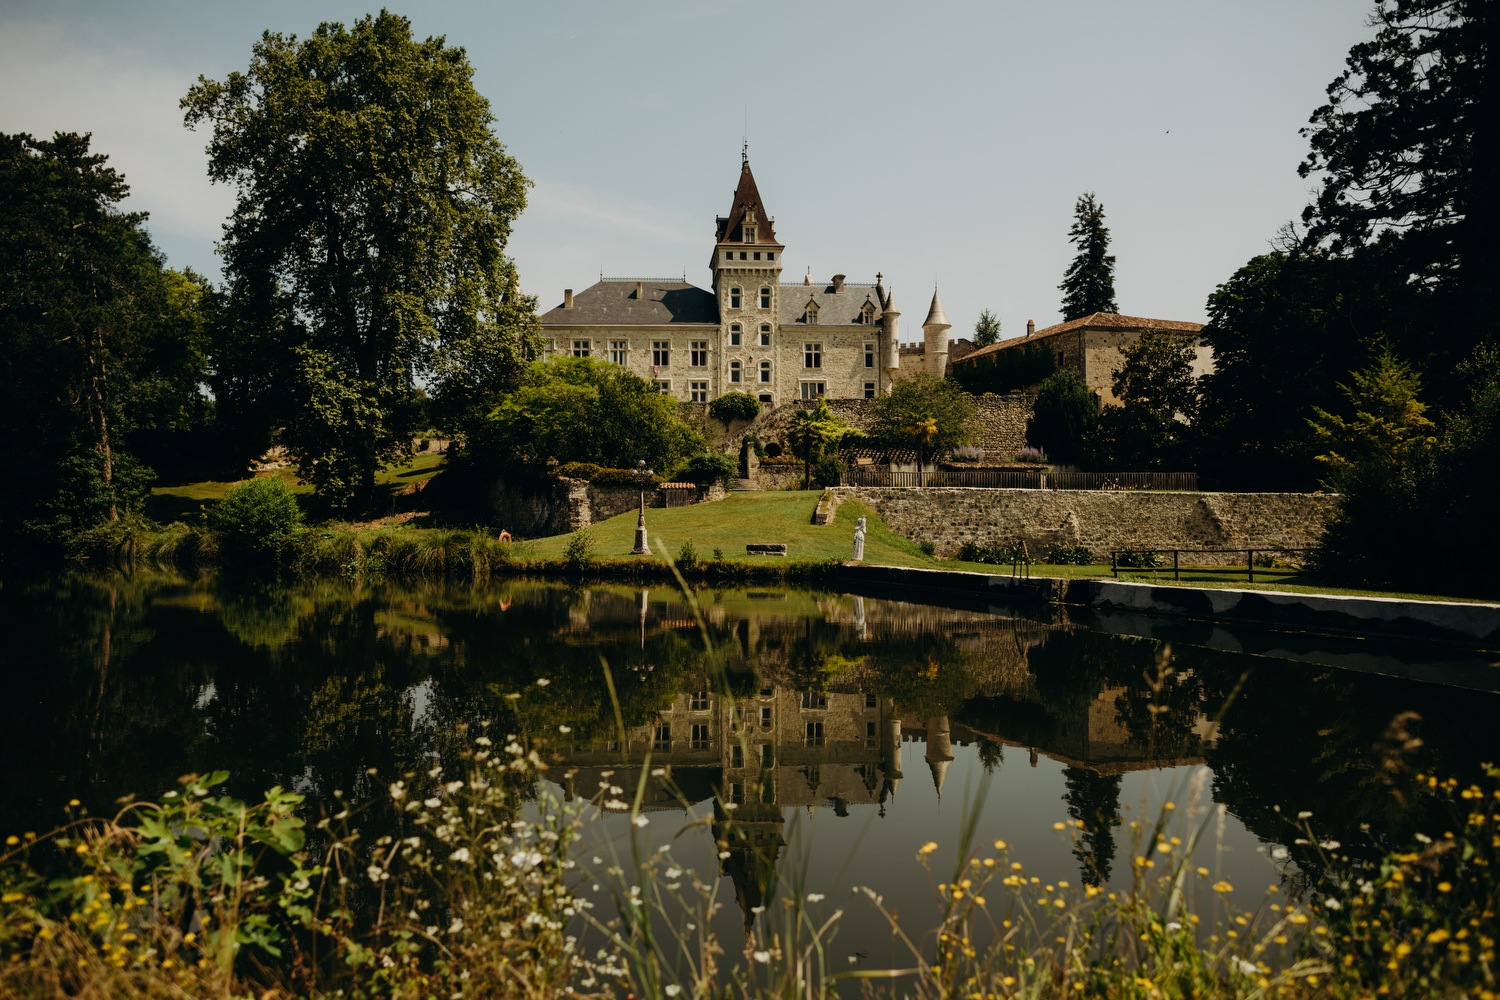 reflection of Chateau de lisse on morning of wedding